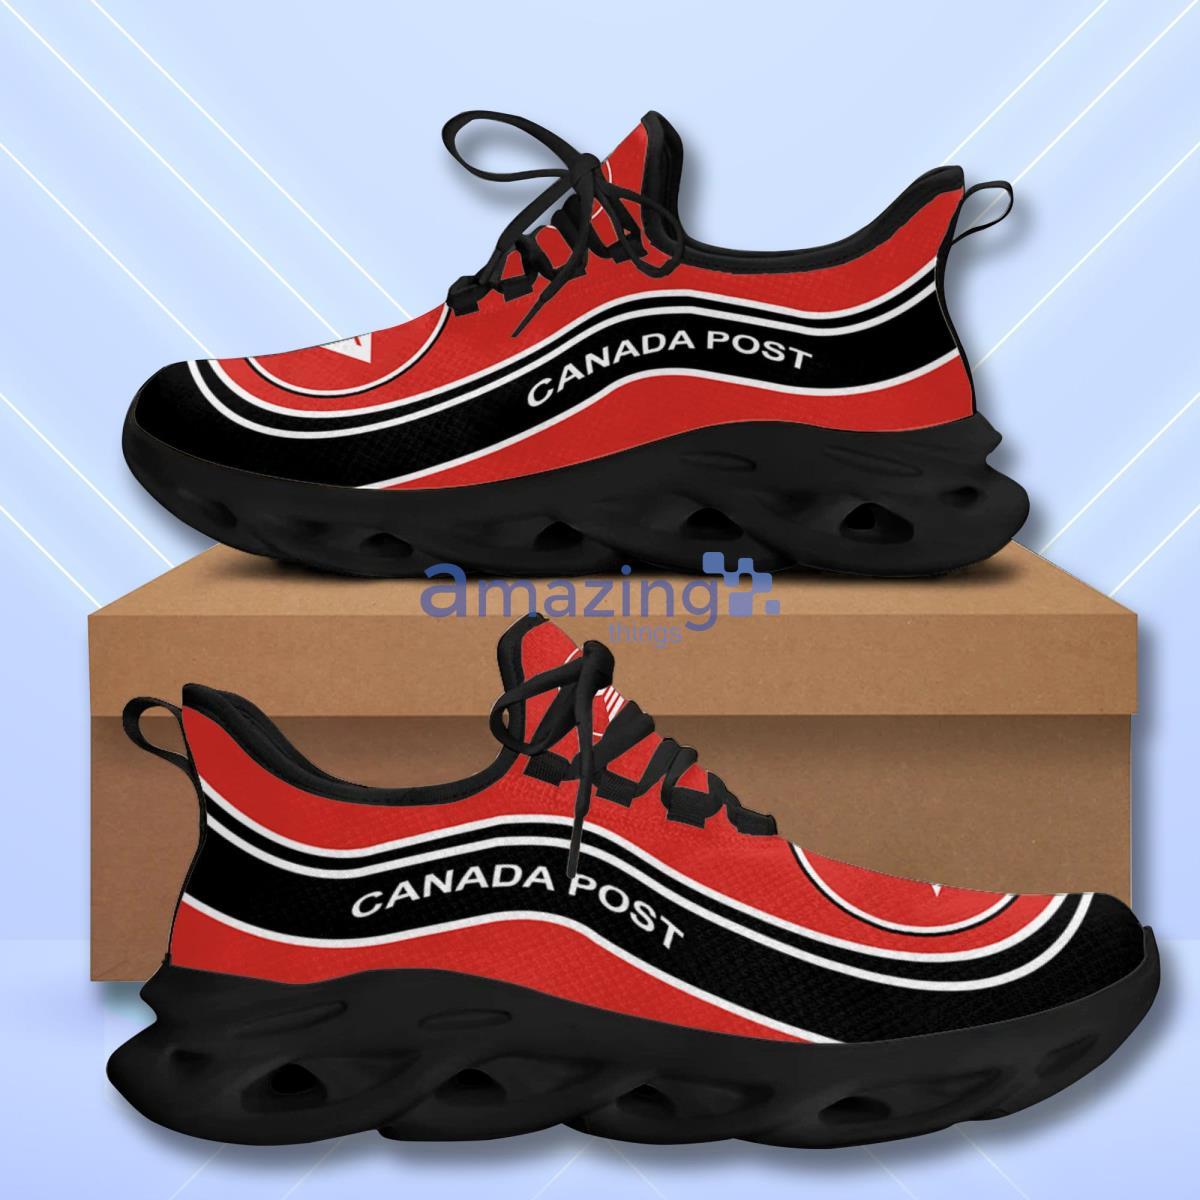 Canada Post Max Soul Shoes Hot Trending Great Gift For Men Women Product Photo 1